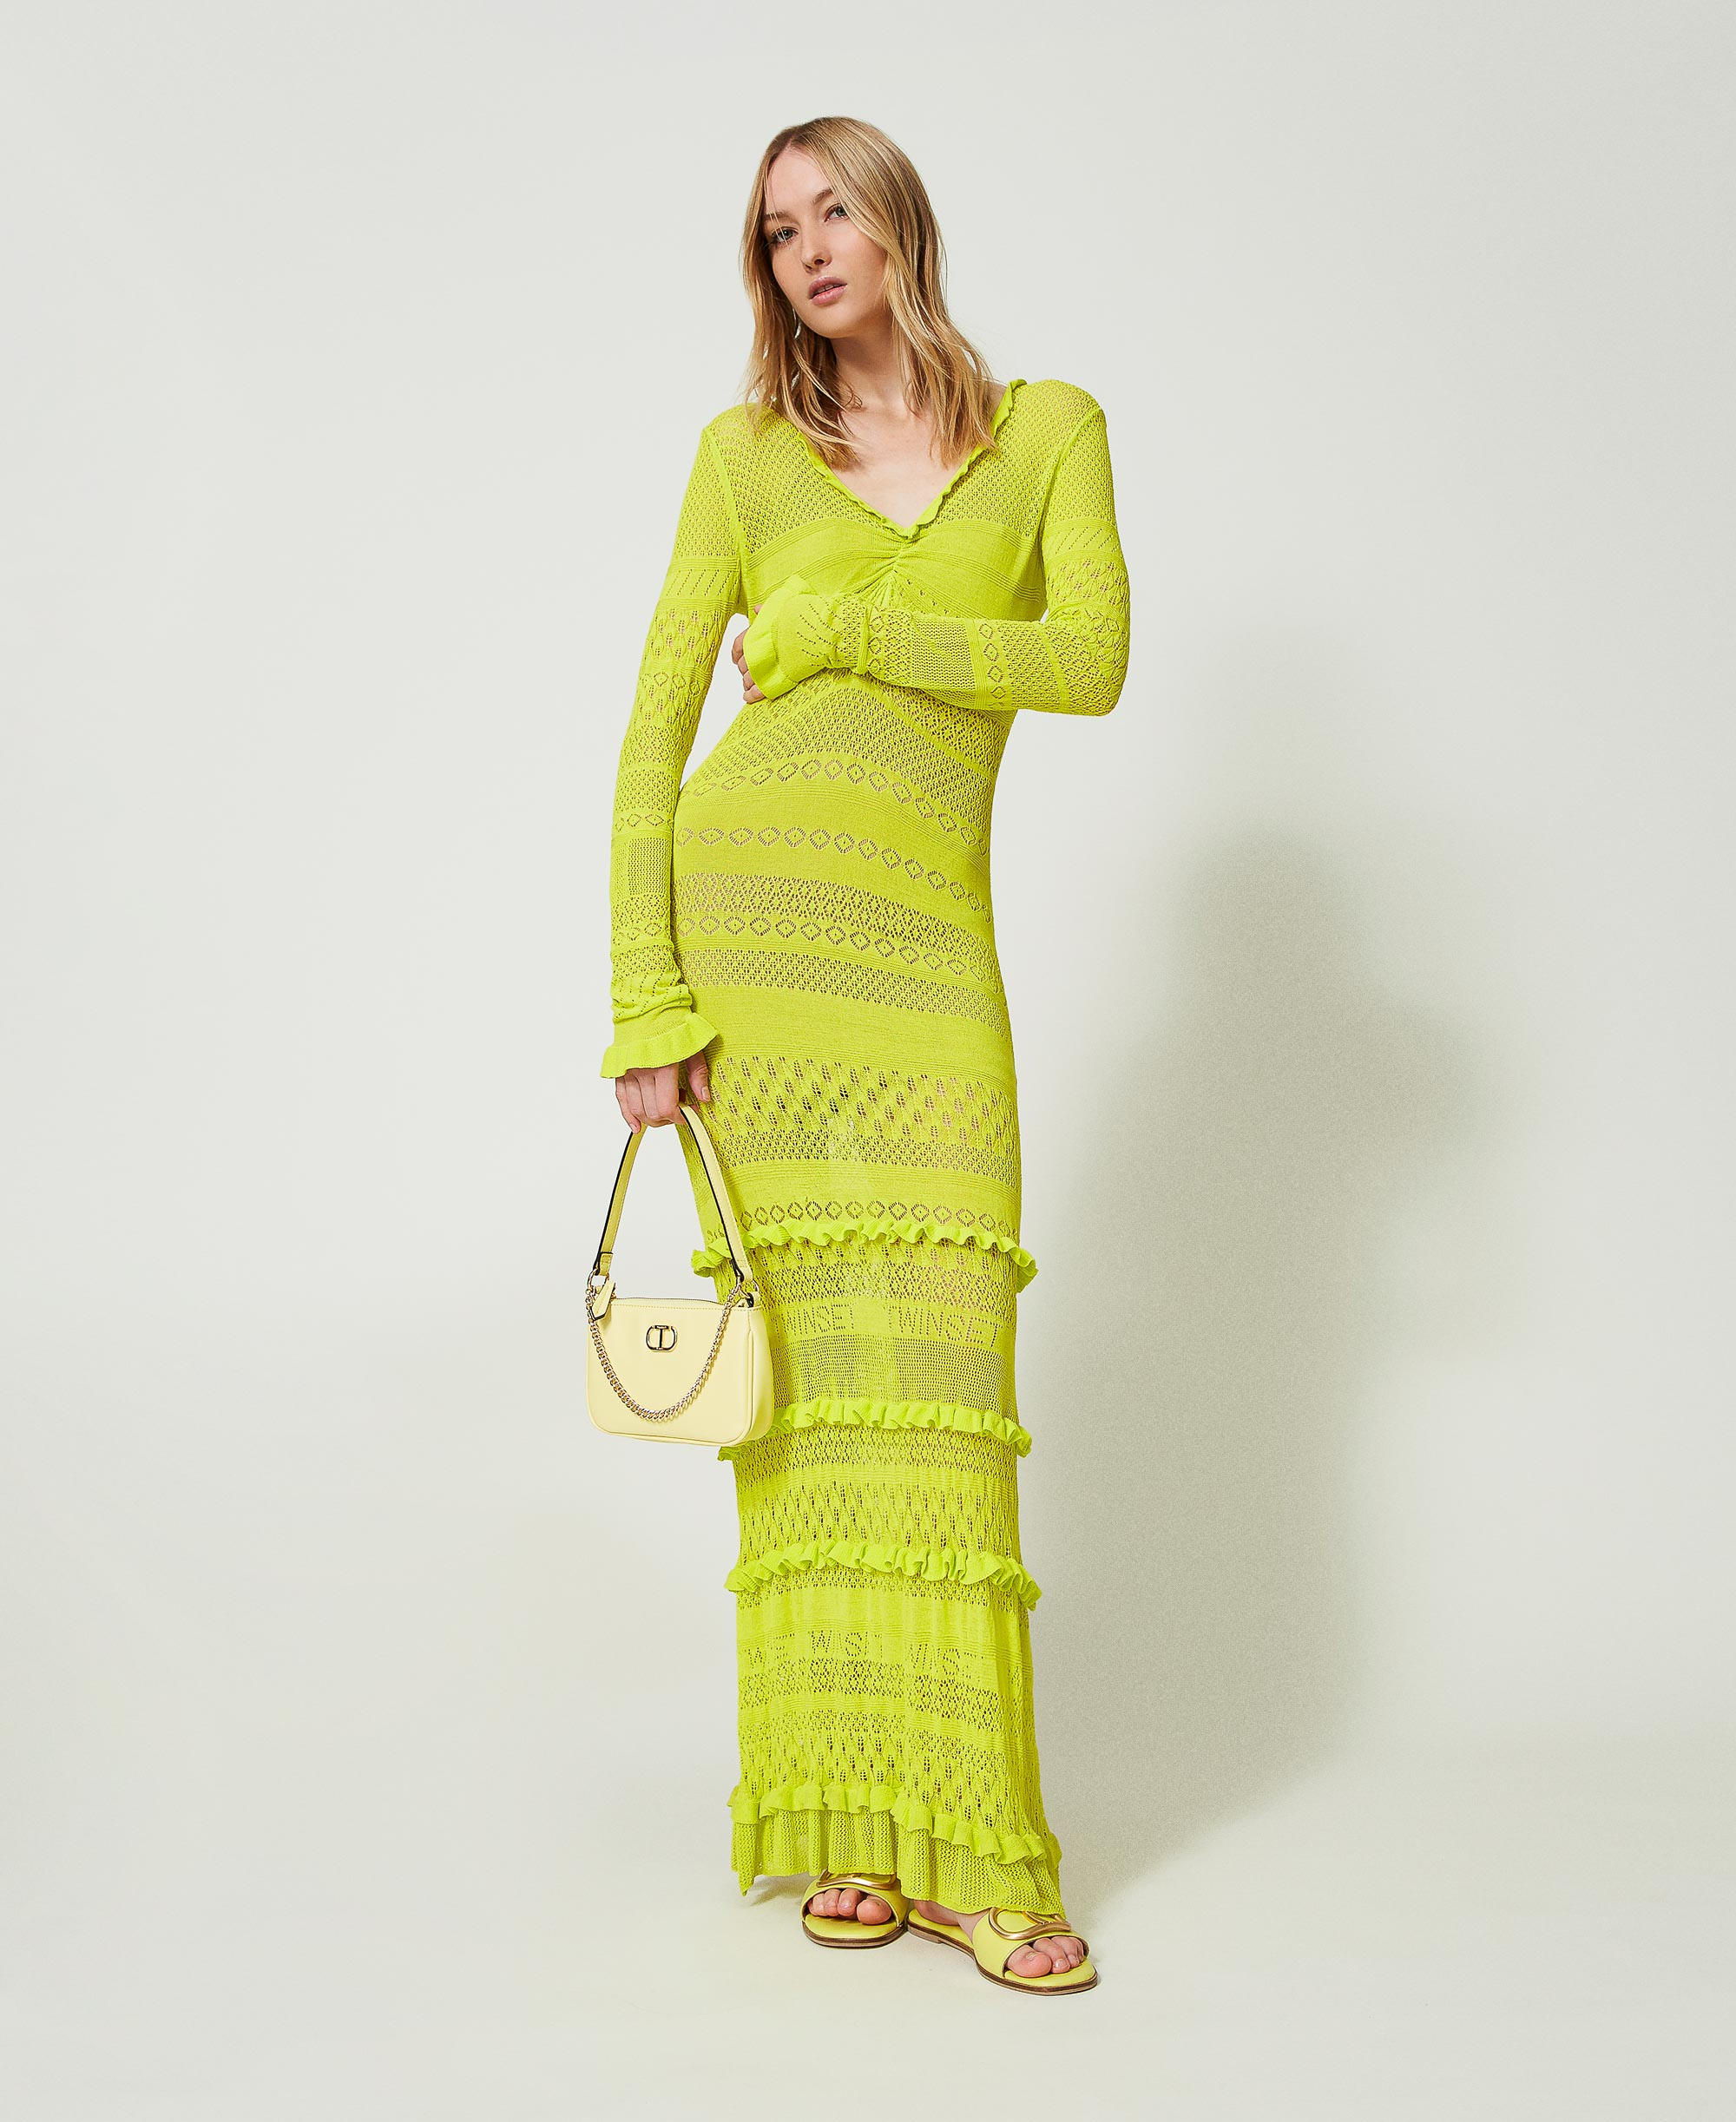 Fitted long openwork knit dress